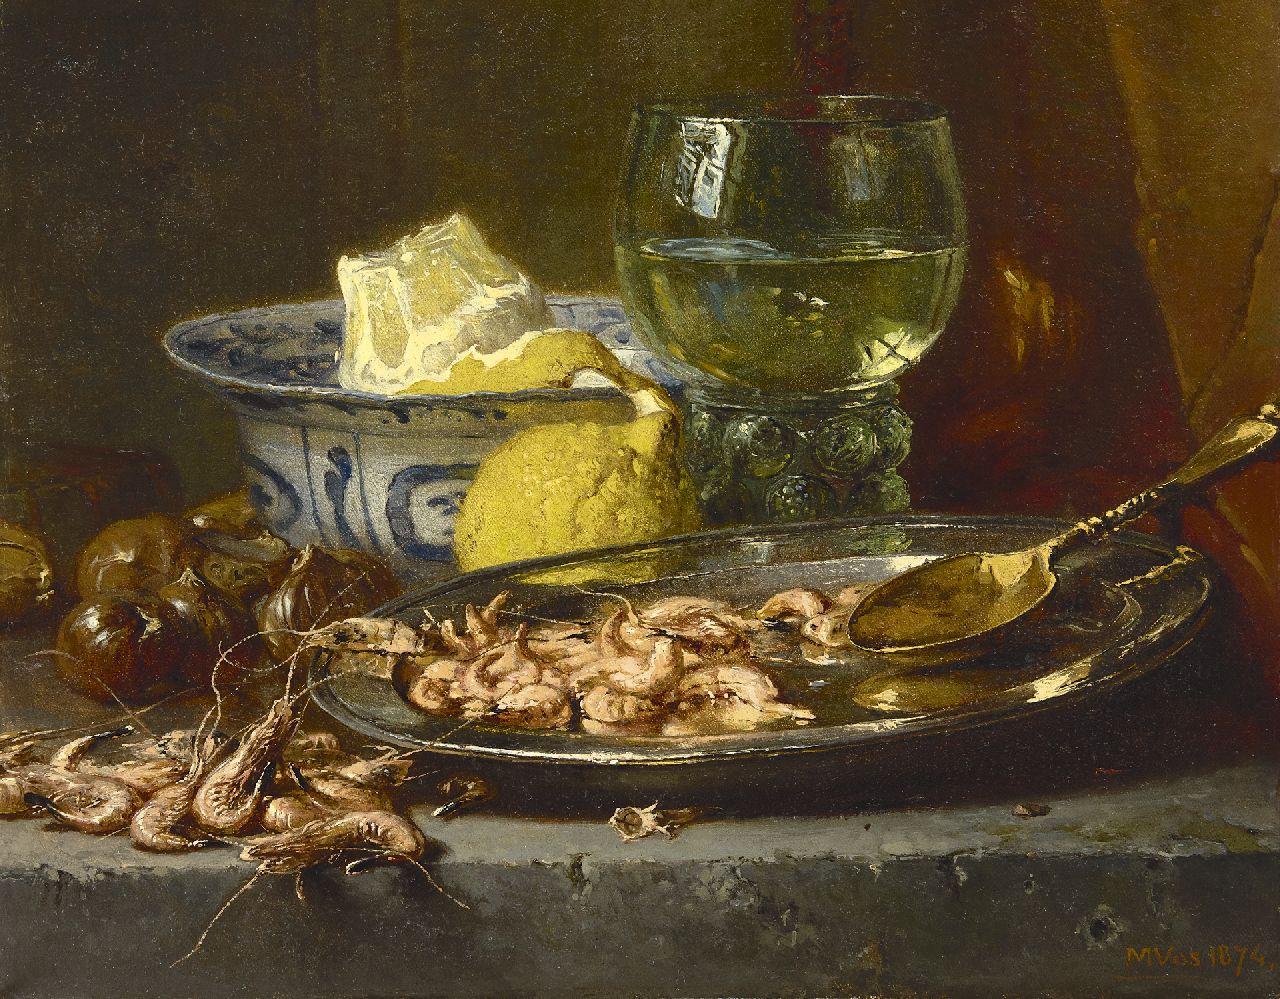 Vos M.  | Maria Vos, A still life with shrimps and a goblet, oil on canvas 33.5 x 42.0 cm, signed l.r. and dated 1874